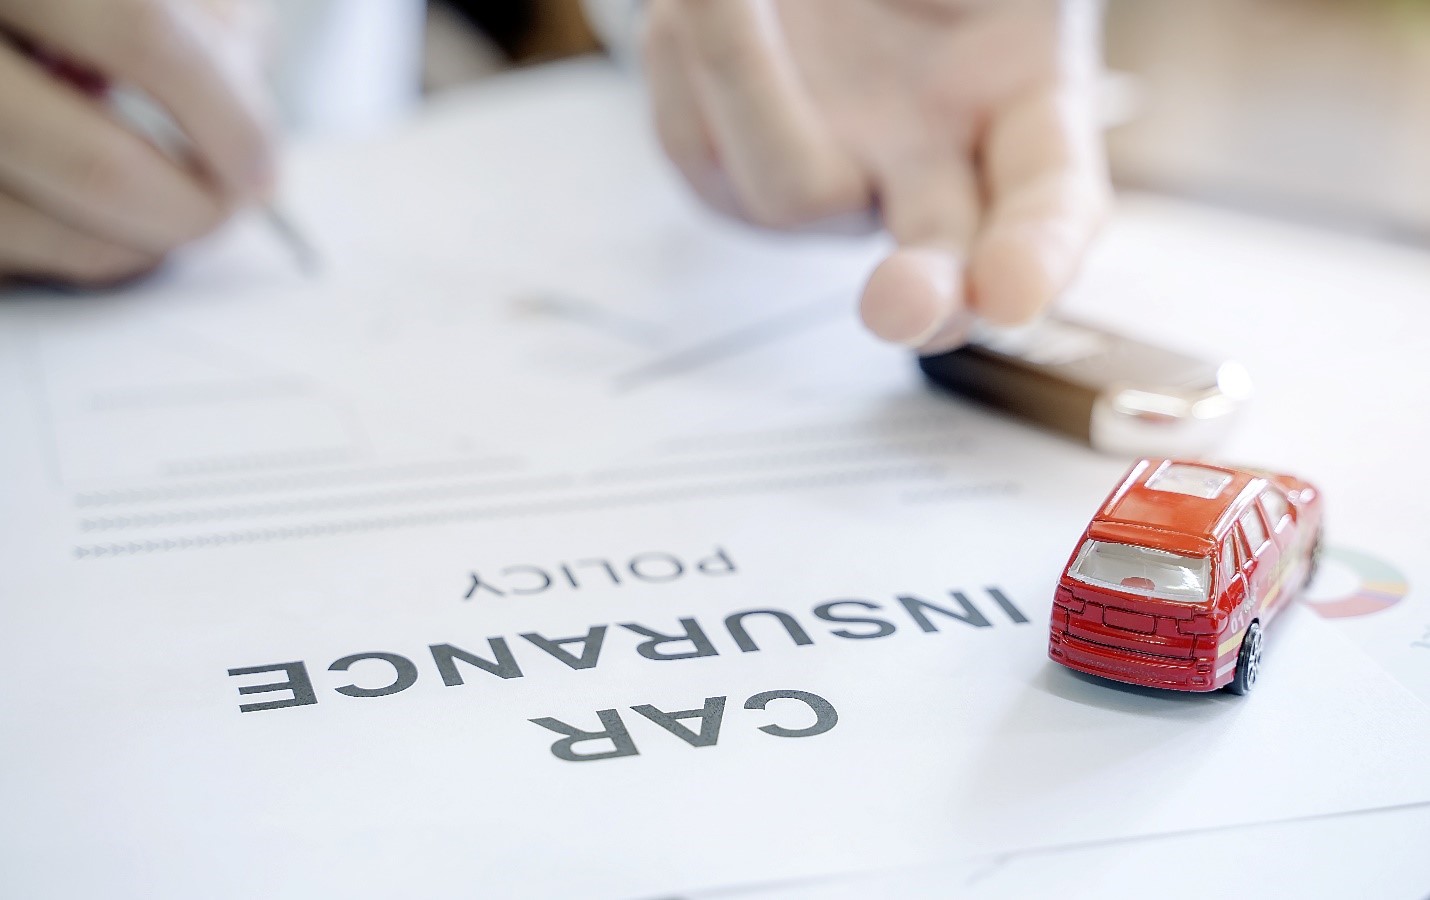 Car Insurance in Singapore: Tips for Getting the Best Rates